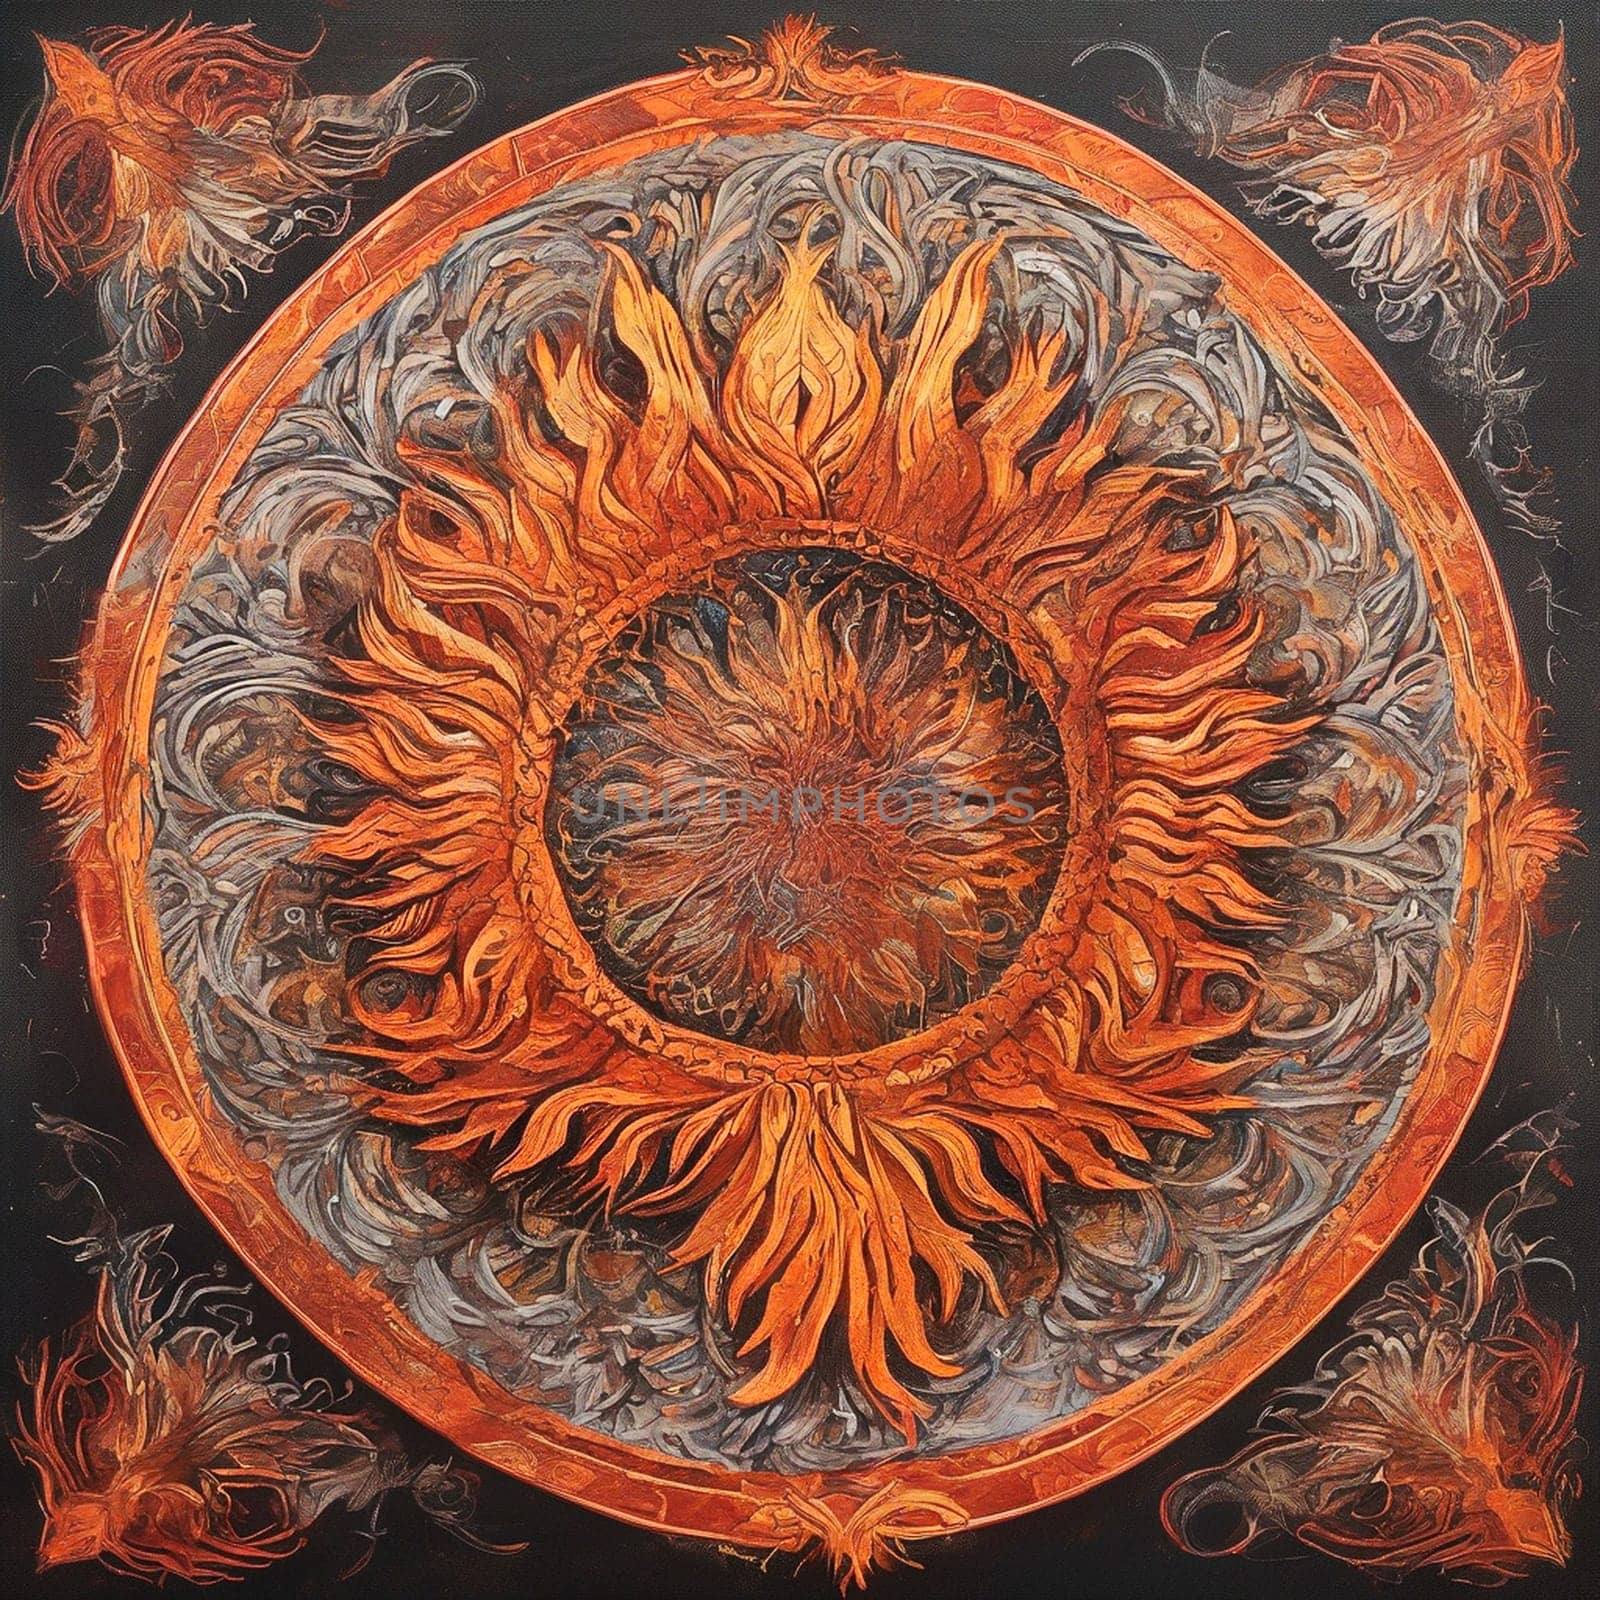 Kaleidoscope of a glowing mandala in red orange golden colors, flames sparks circle symmetrical design on black background.